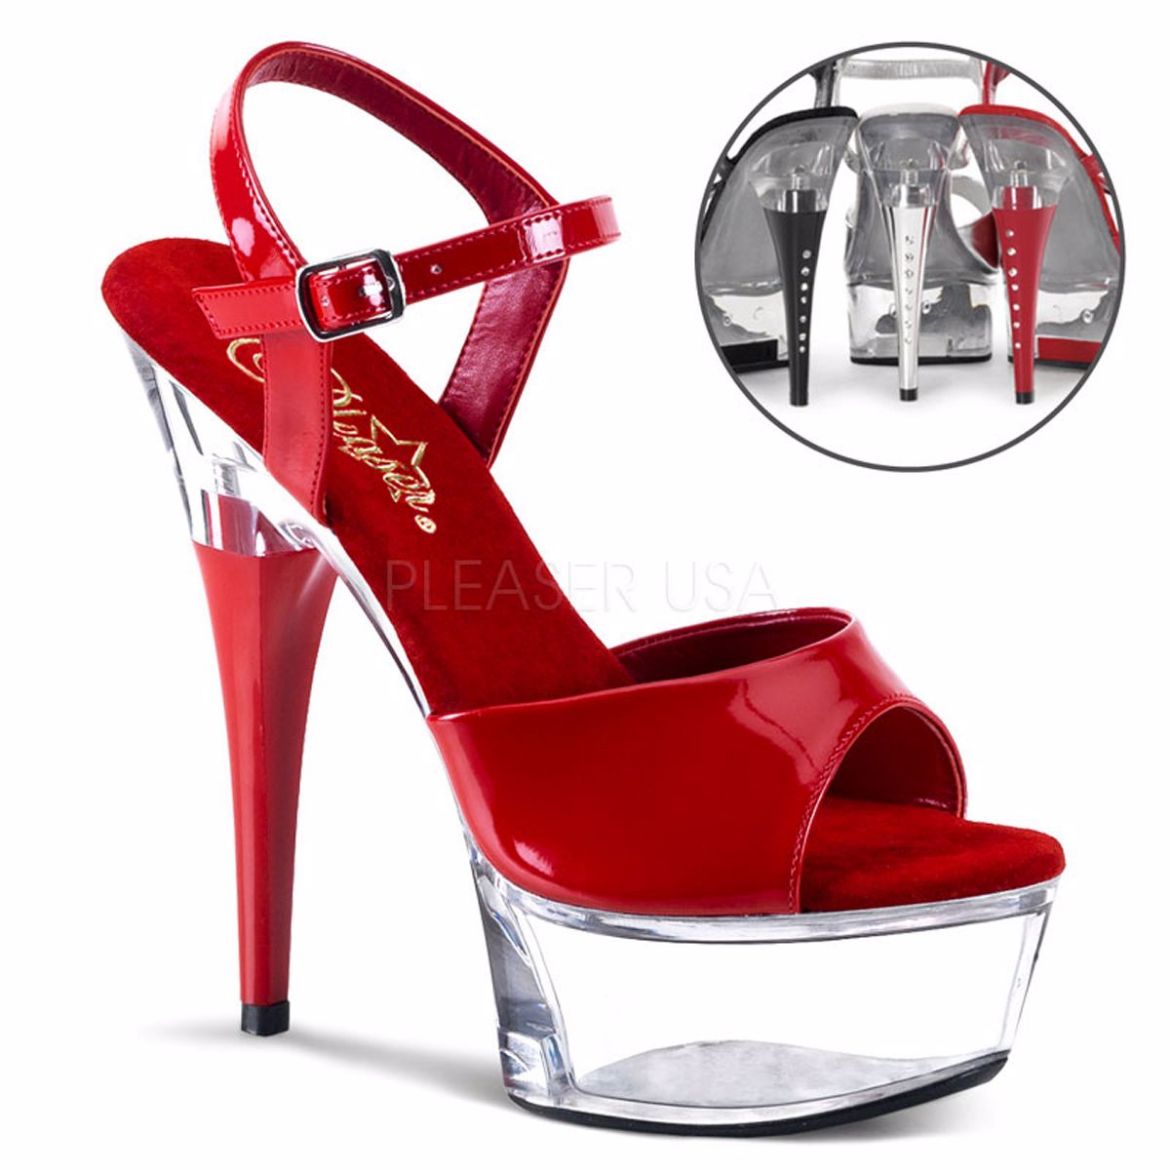 Product image of Pleaser Captiva-609 Red Patent/Clear, 6 inch (15.2 cm) Heel, 1 3/4 inch (4.4 cm) Platform Sandal Shoes